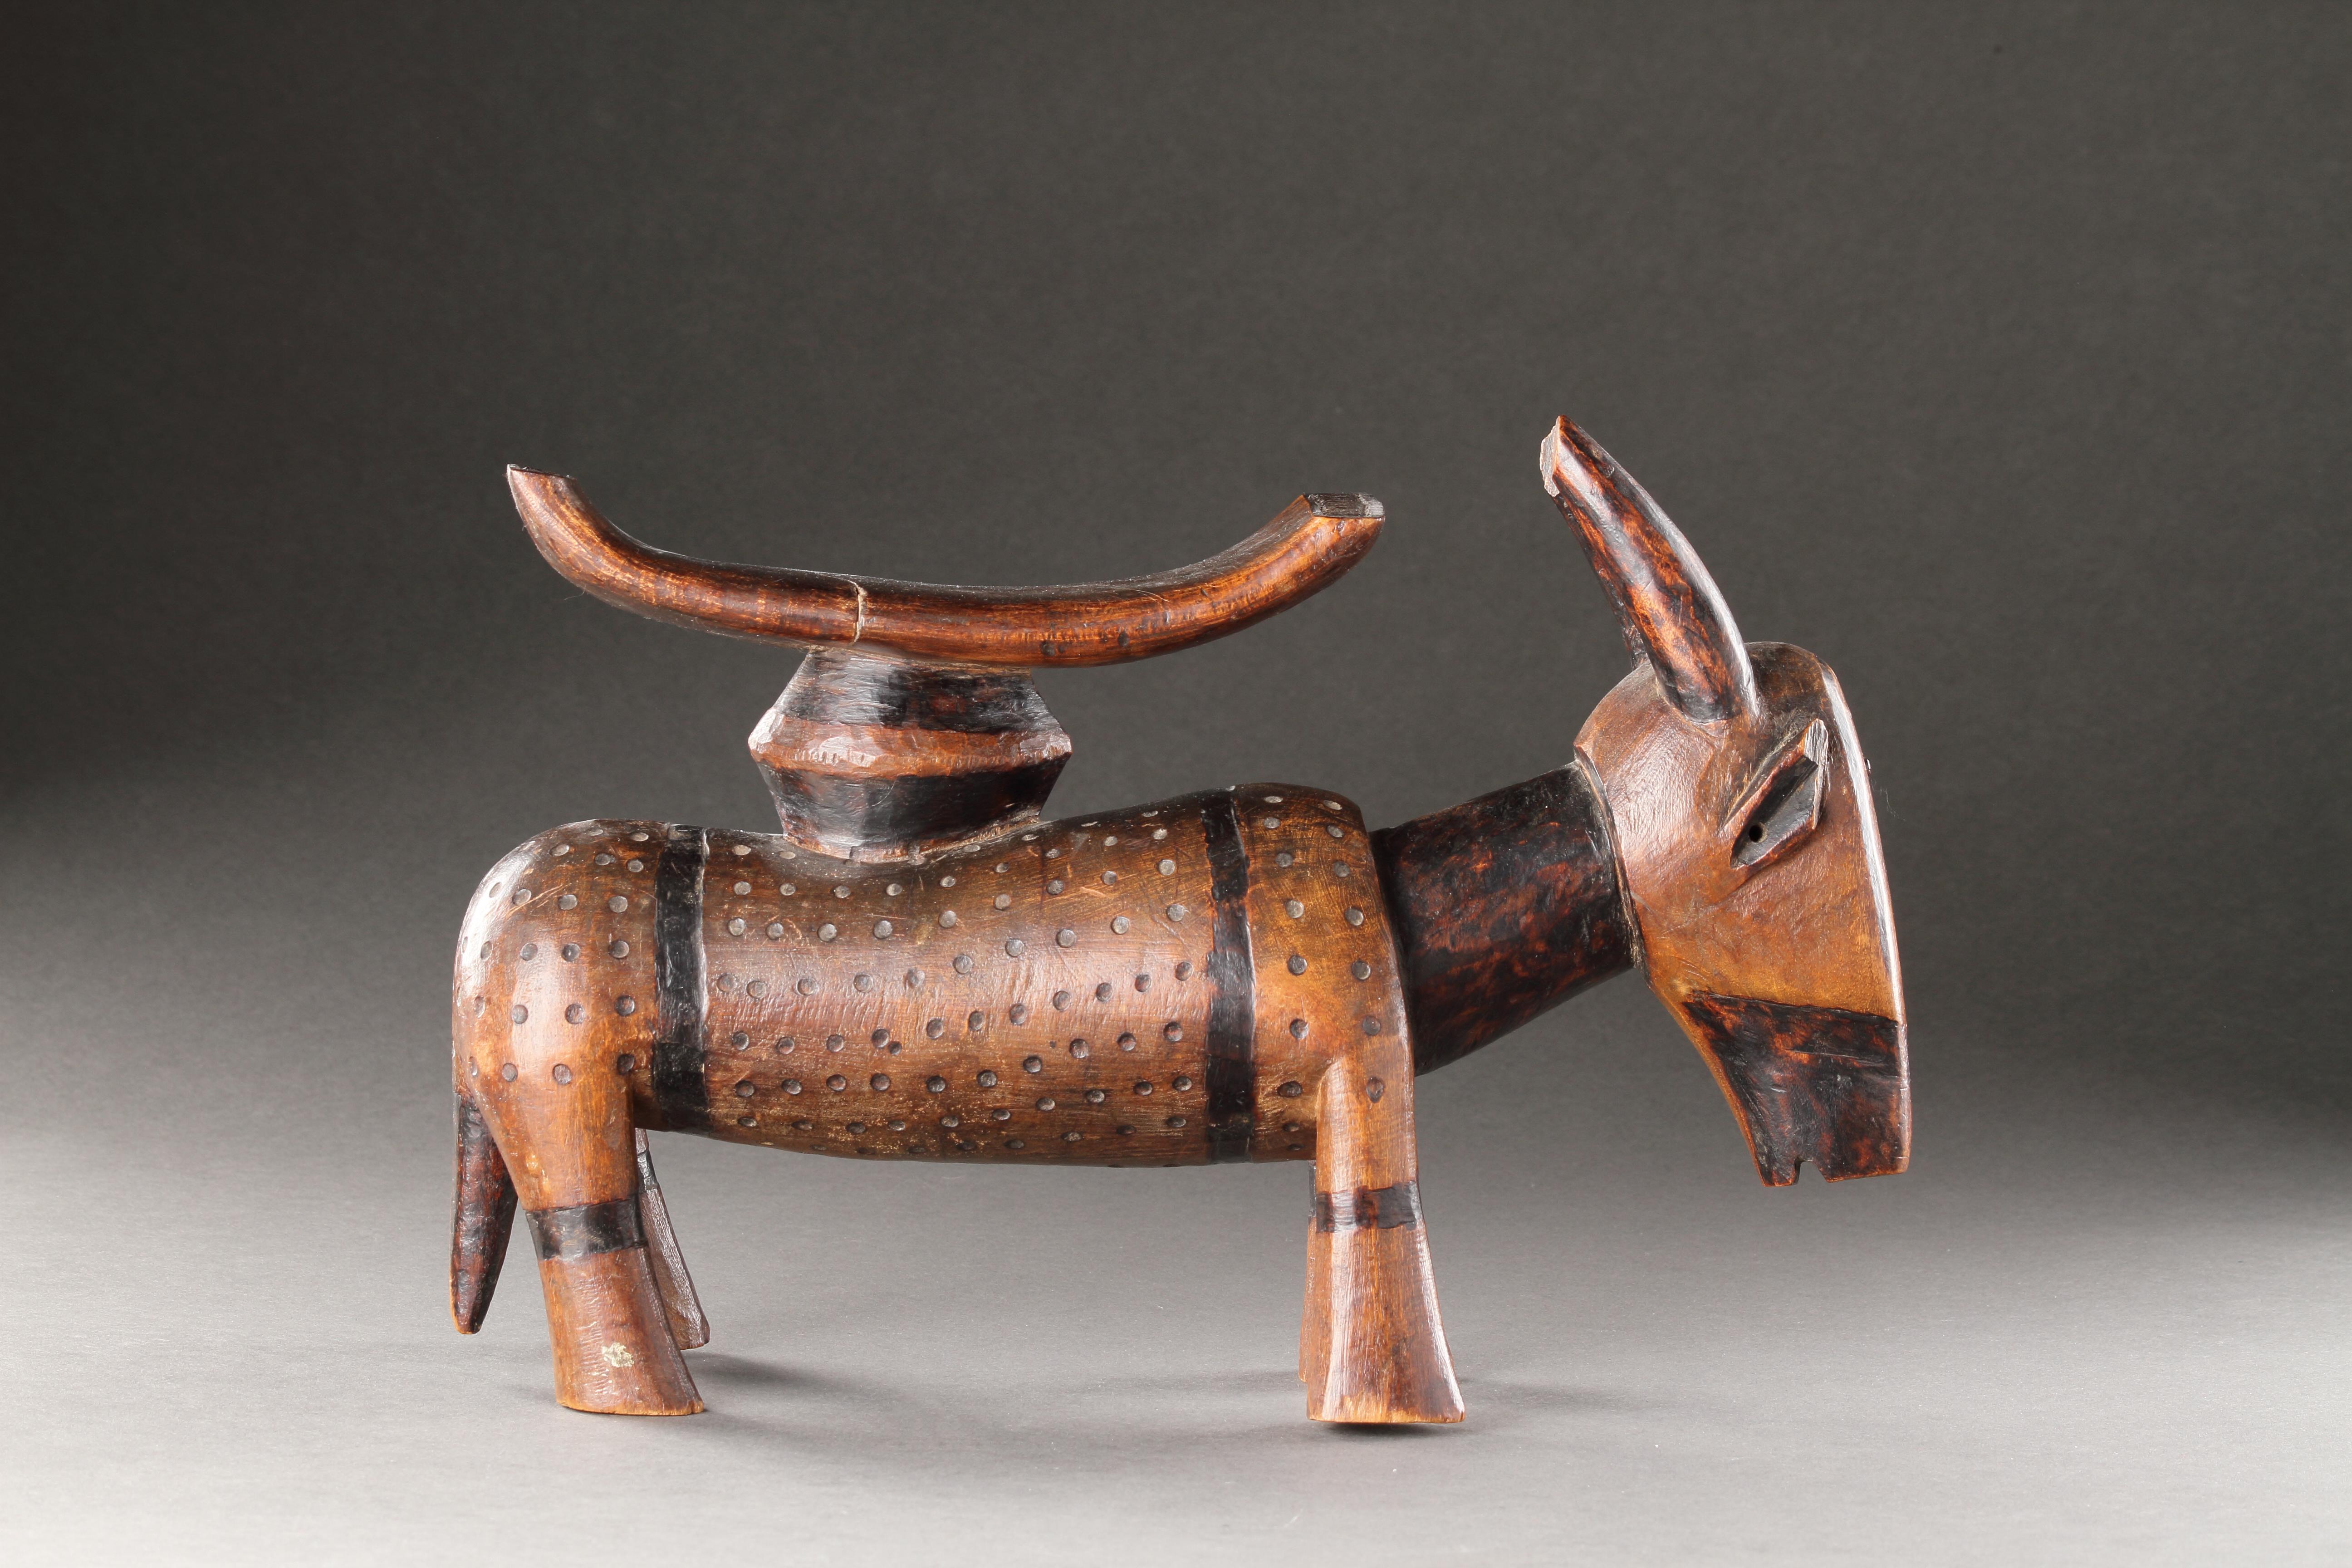 An Unusually Large and Fine Tsonga ‘Antelope’ Headrest 
Wood, pigment, glass beads 
Zimbabwe
19th Century 

SIZE: 20cm high, 32cm wide - 8 ins high, 12½ ins wide 

PROVENANCE:
Ex Private UK collection 
Sold through auction and purchased through